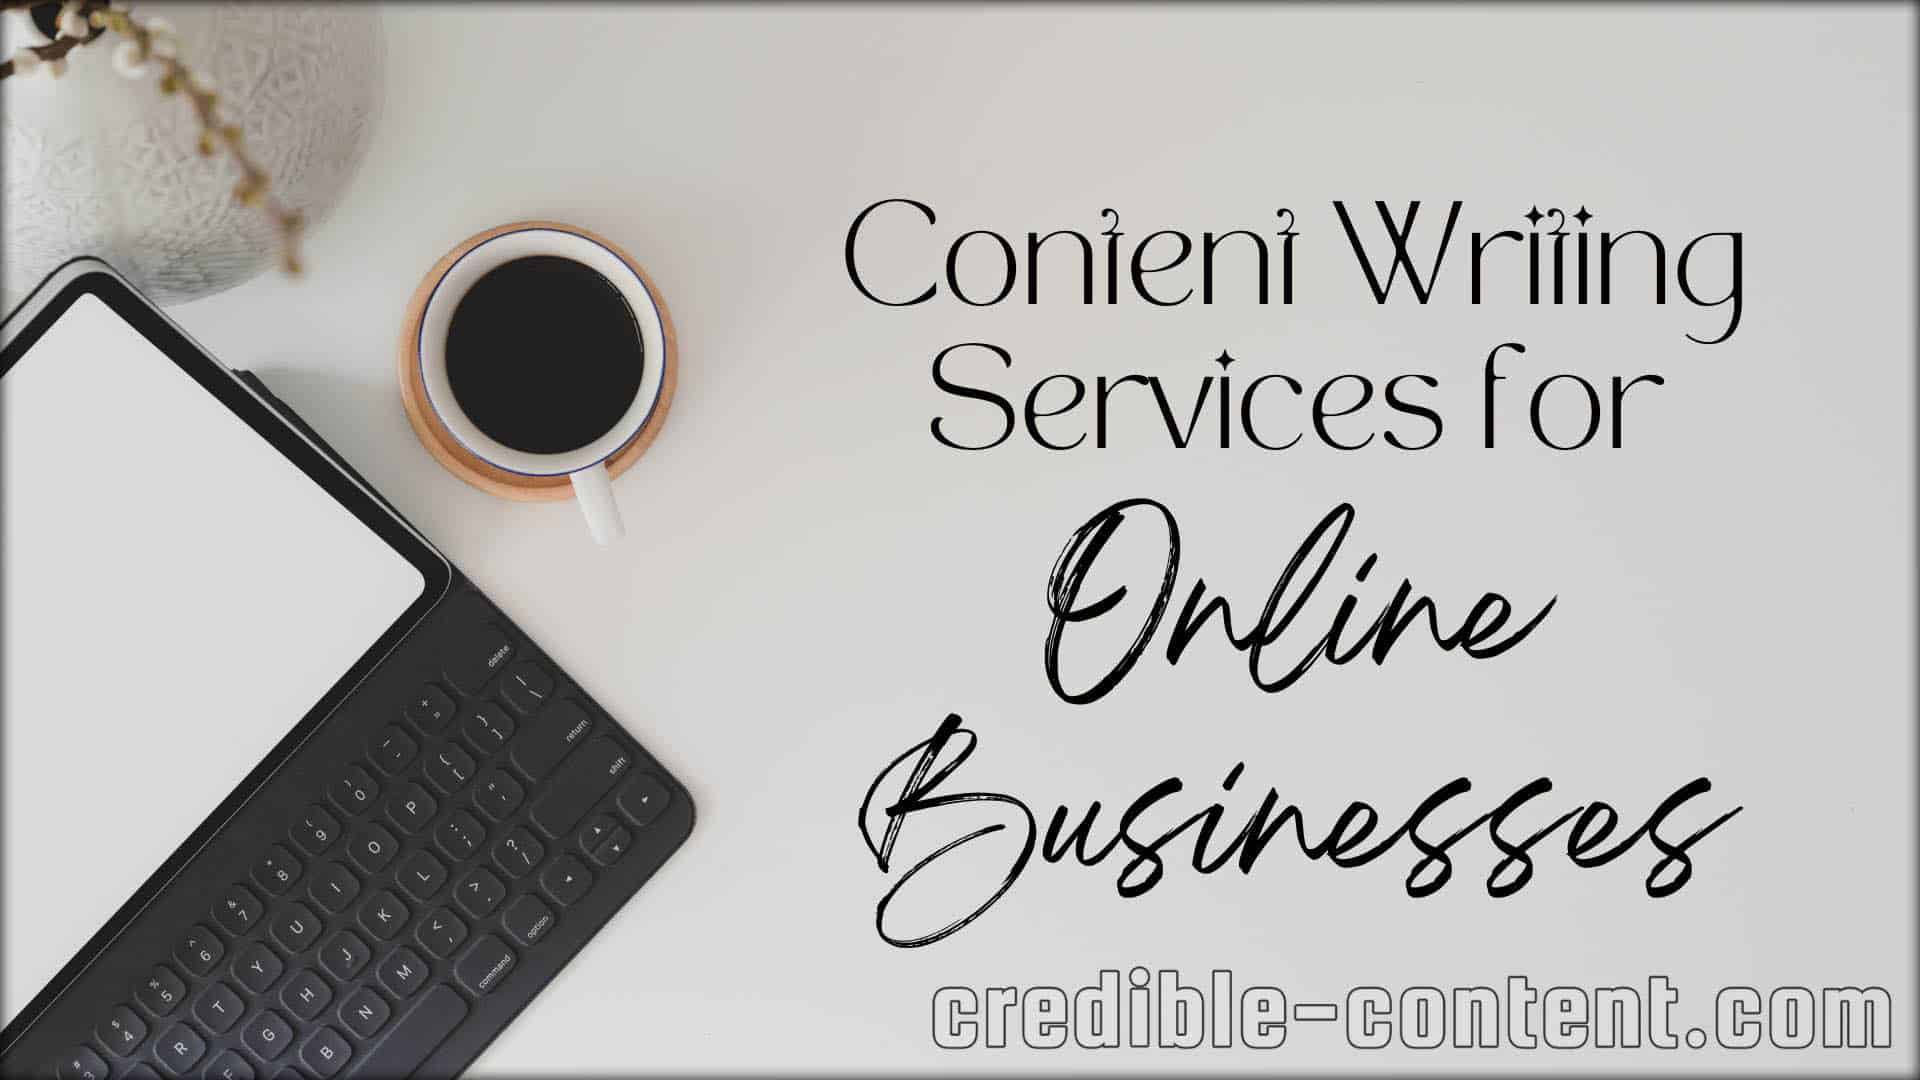 Content writing services for online businesses